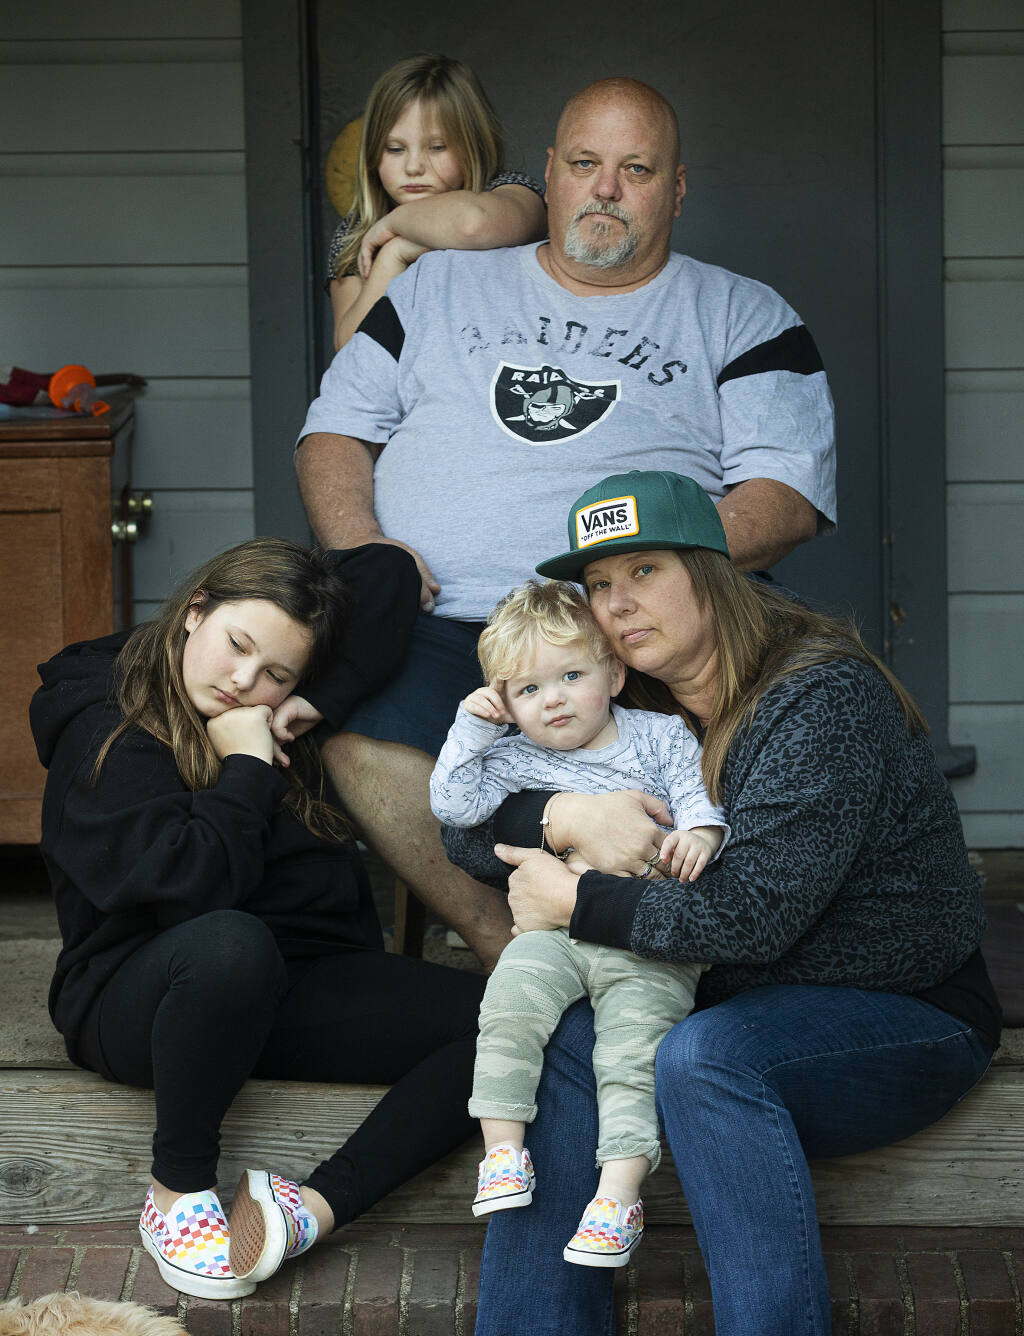 When Joe Morrell, top right, and his daughter, Patsy, 9, lower left, went to buy ice cream in the Guerneville Safeway for the shared birthday of Patsy's mom Iva, 47, lower right, and Jillian, 7, top left, a truck smashed into the back of their parked pickup before driving away and crashing last Tuesday. Iva, Jillian and Indigo, 18 months, were inside their pickup when it was struck. Photo taken on Friday, Feb. 26, 2021. (John Burgess / The Press Democrat)